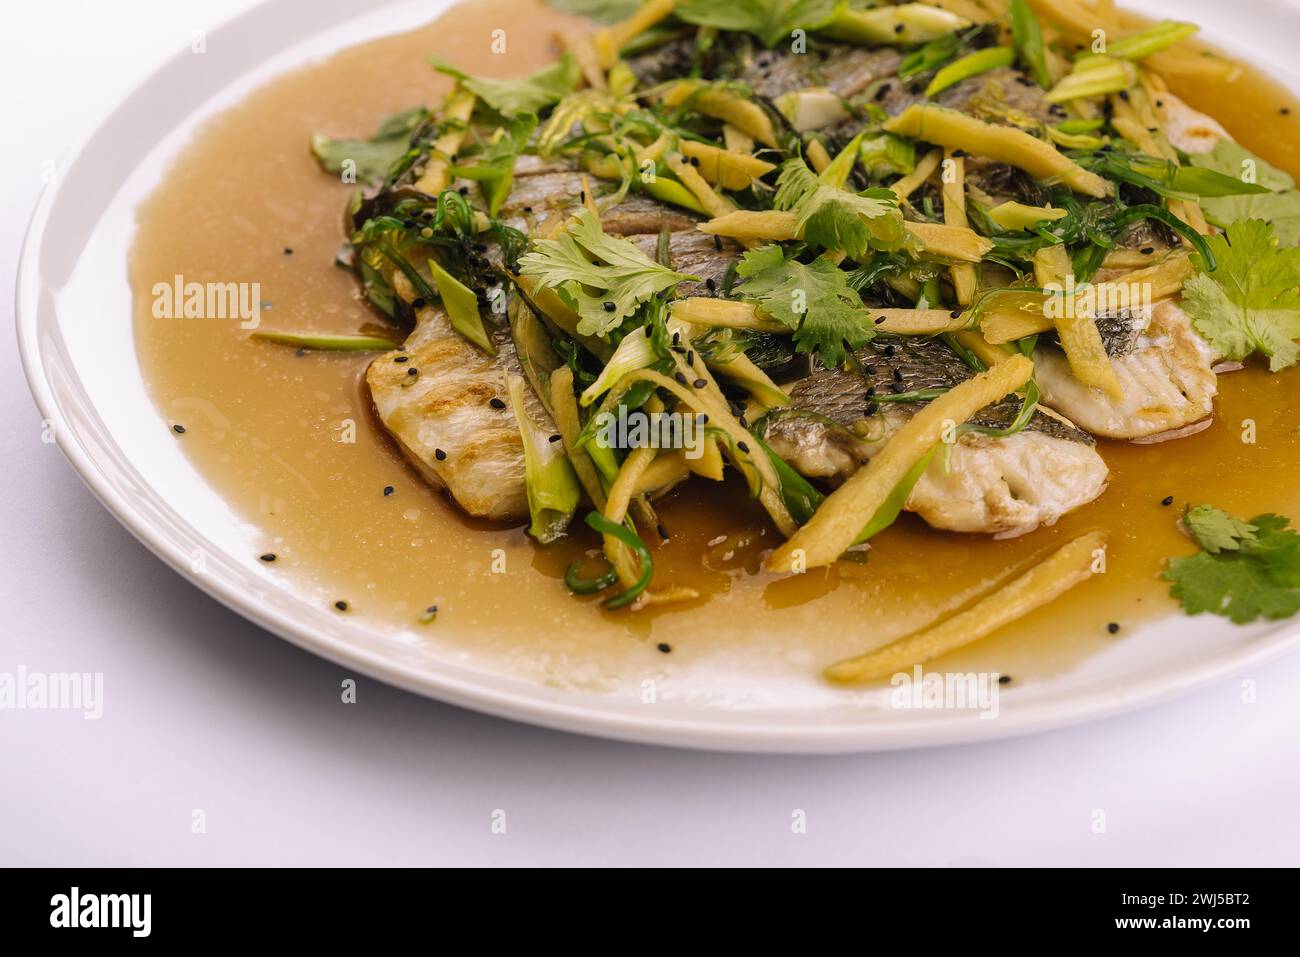 Fried fish fillet. cod with sauce and herbs Stock Photo